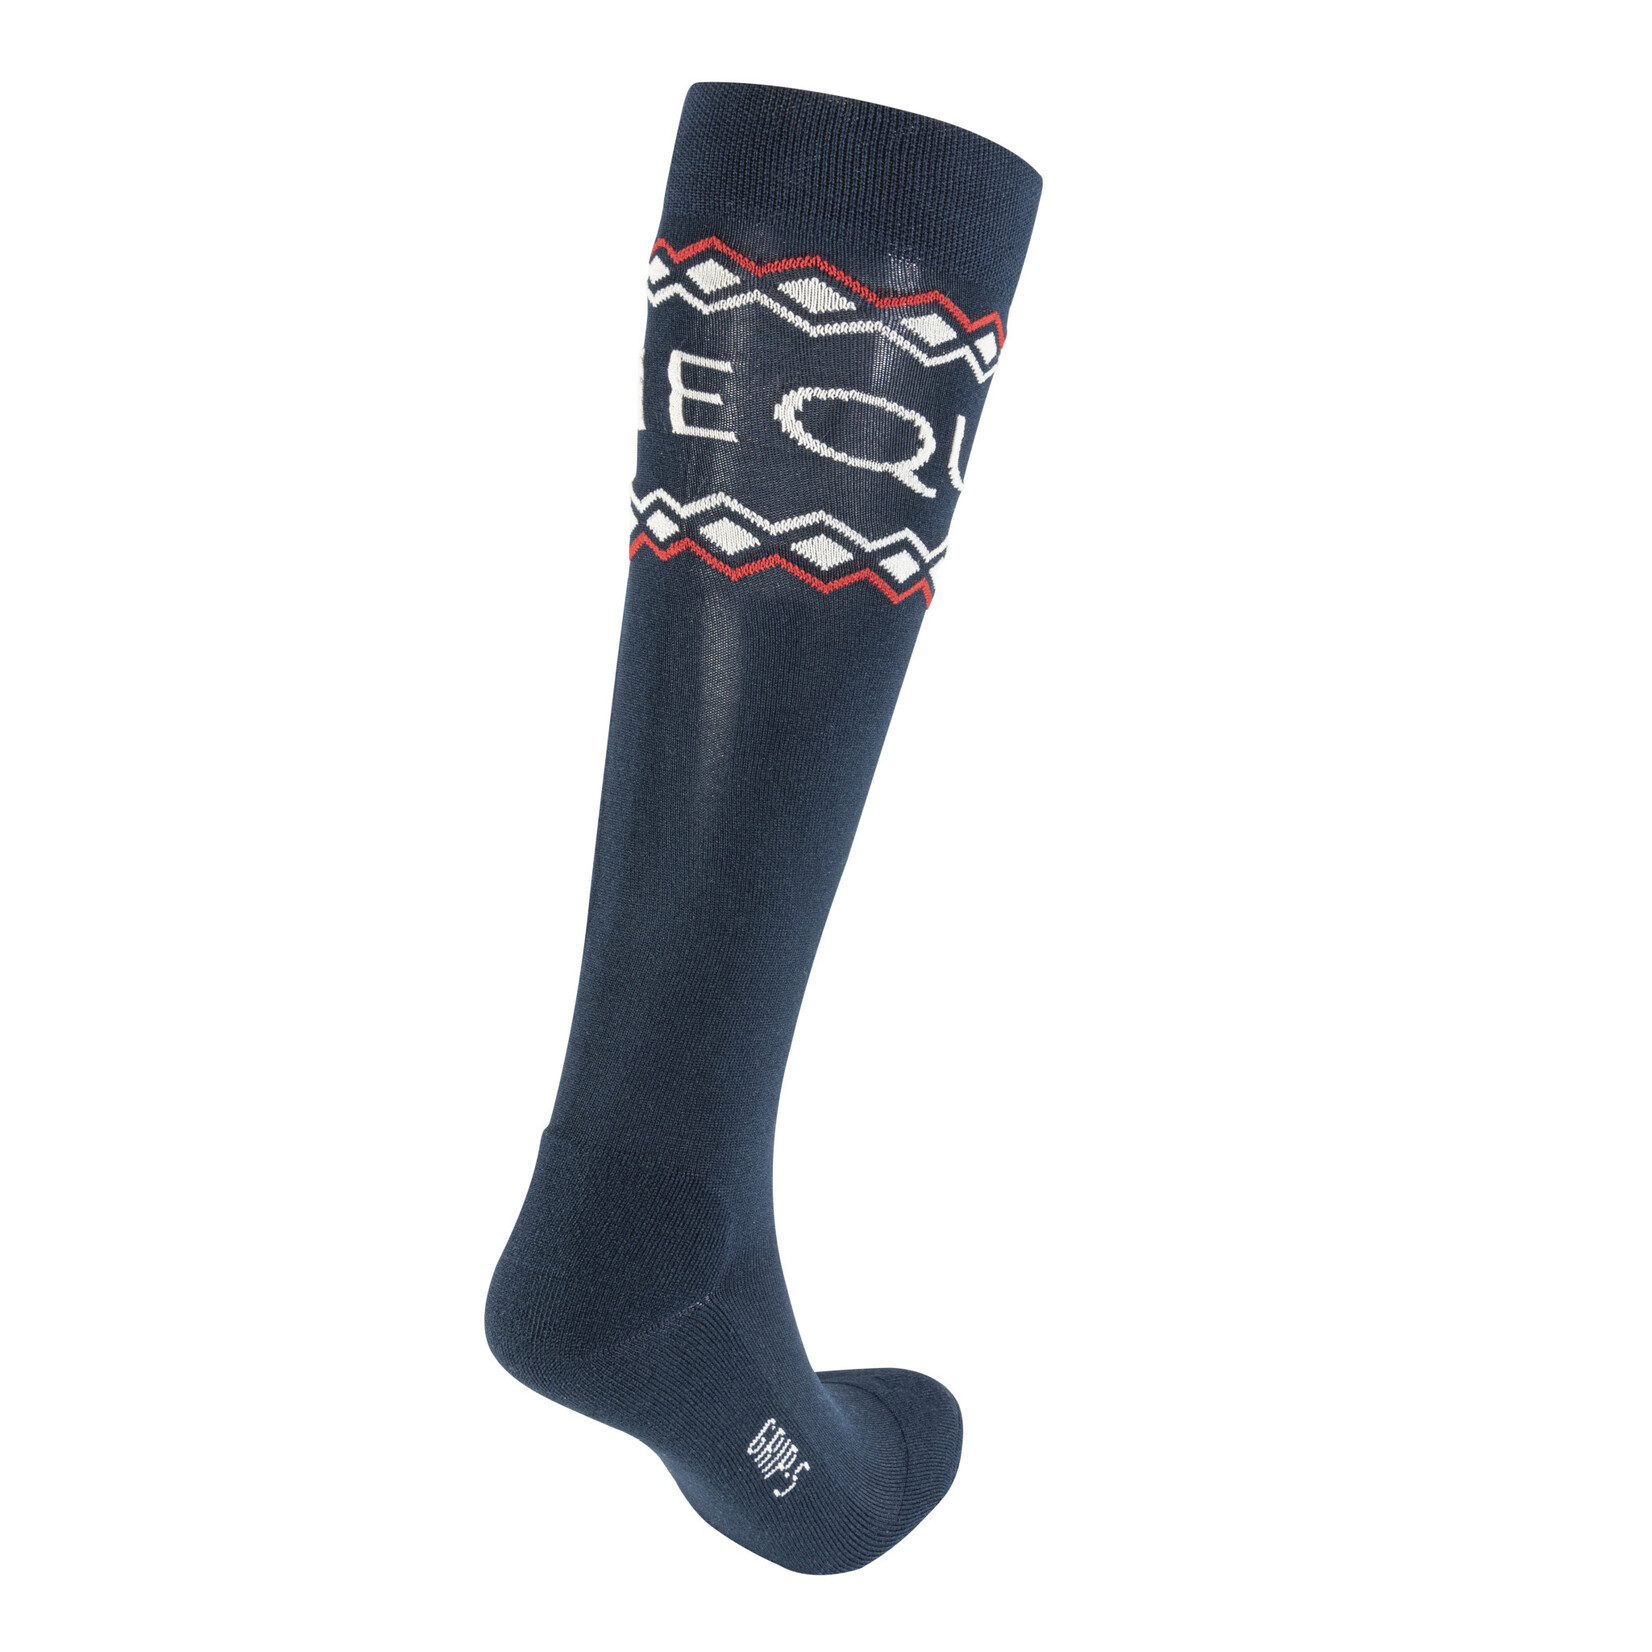 Equiline T11444 Equiline Blitz Riding Socks